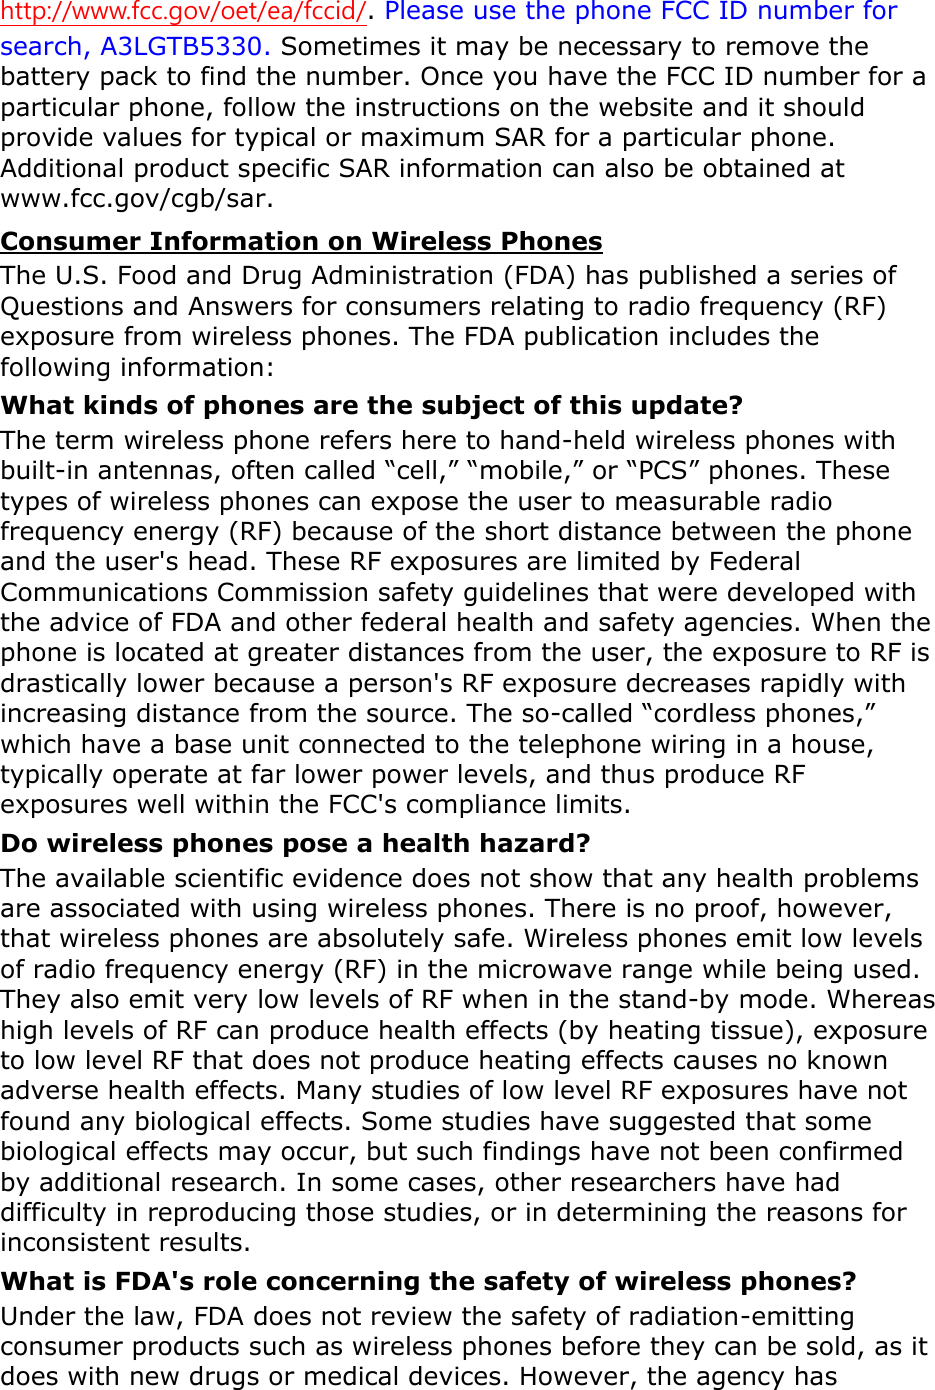 Page 8 of Samsung Electronics Co GTB5330 Cellular/PCS GSM Phone with WLAN and Bluetooth User Manual